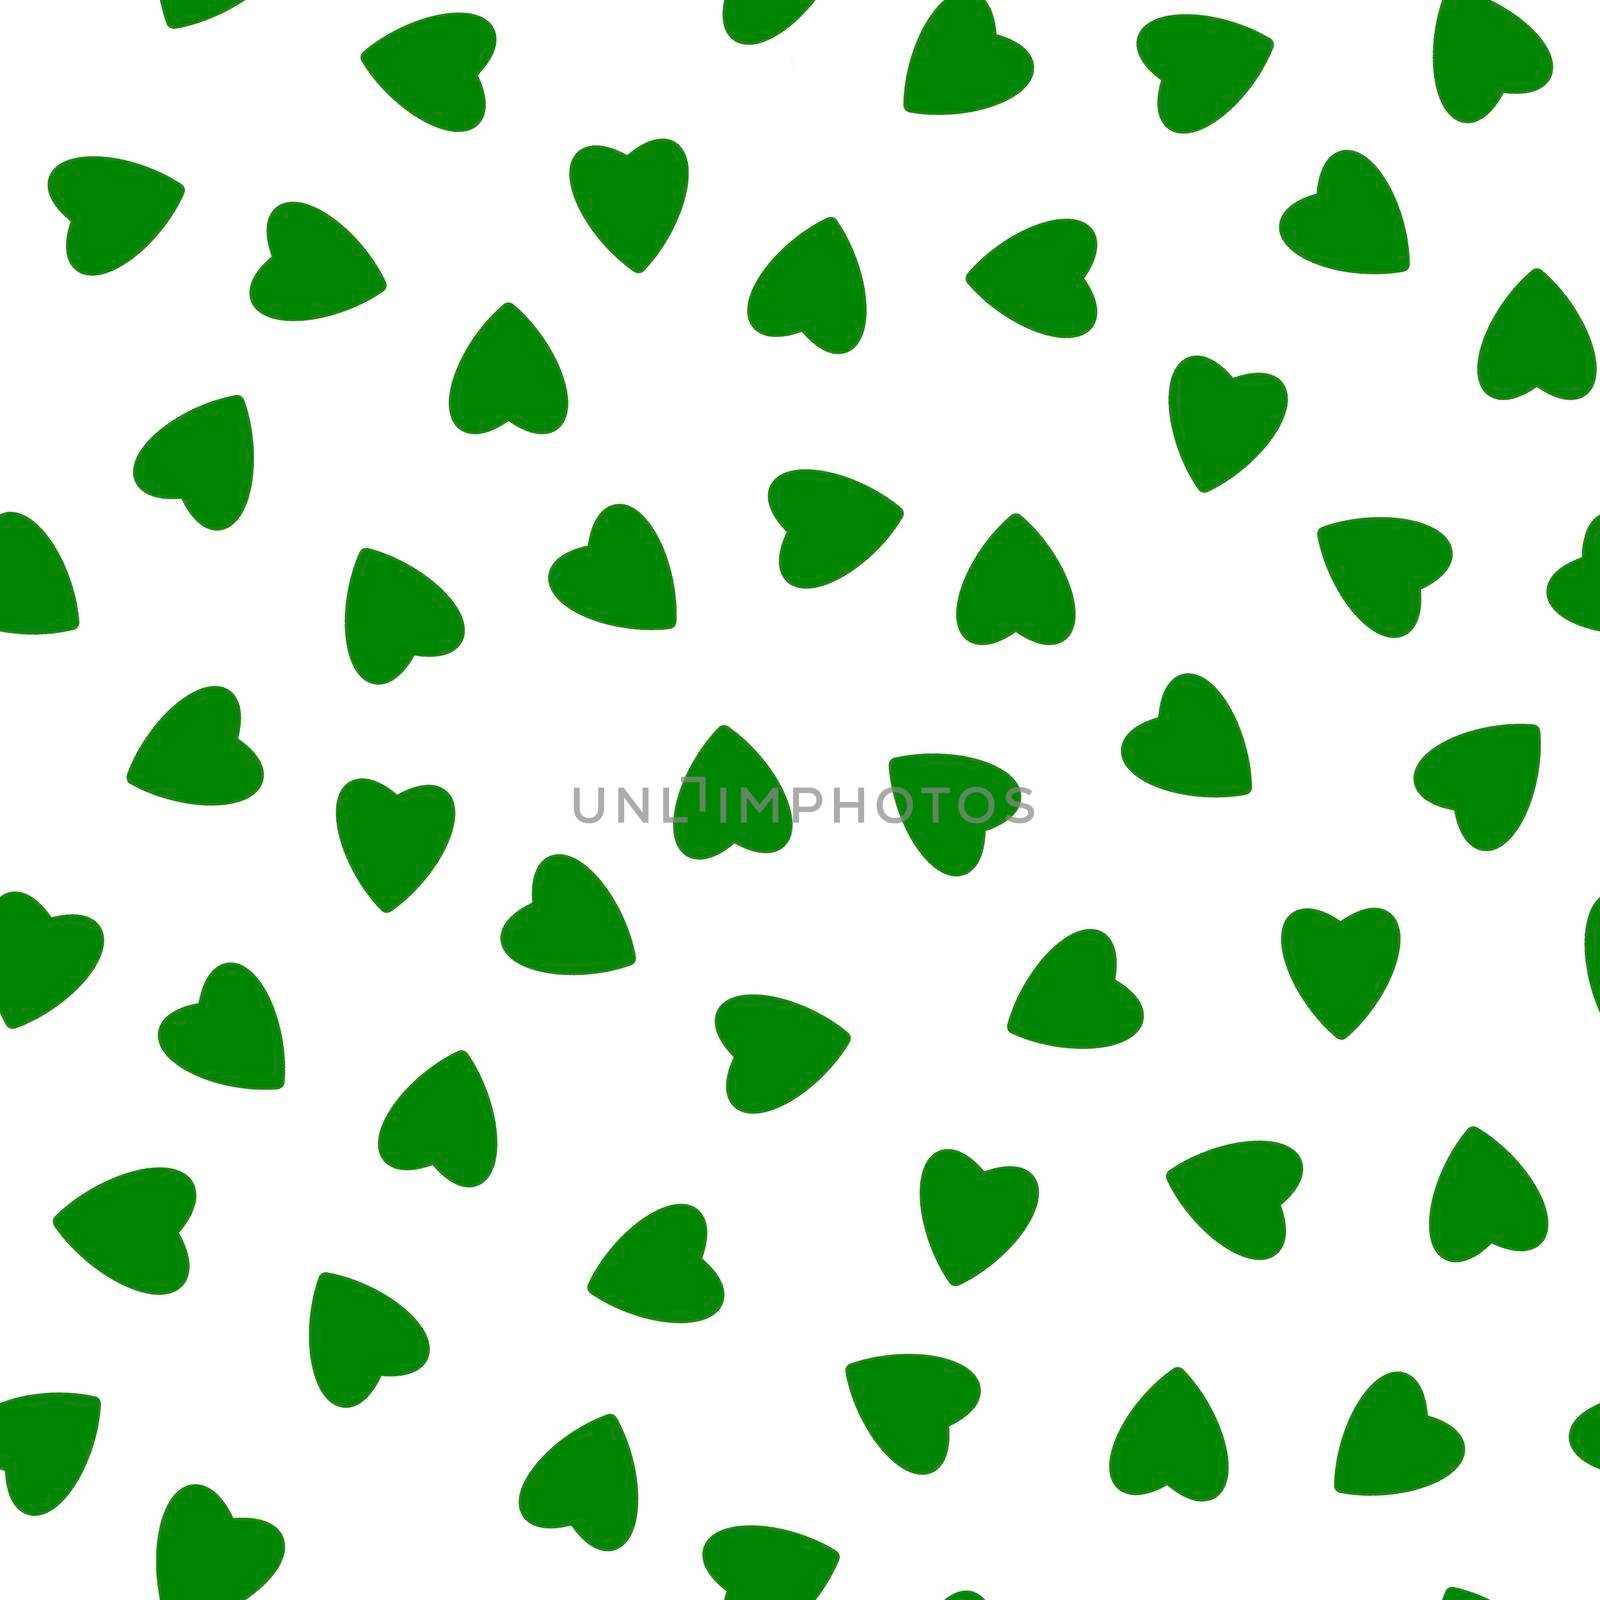 Simple hearts seamless pattern,endless chaotic texture made of tiny heart silhouettes.Valentines,mothers day background.Great for Easter,wedding,scrapbook,gift wrapping paper,textiles.Green on white by Angelsmoon